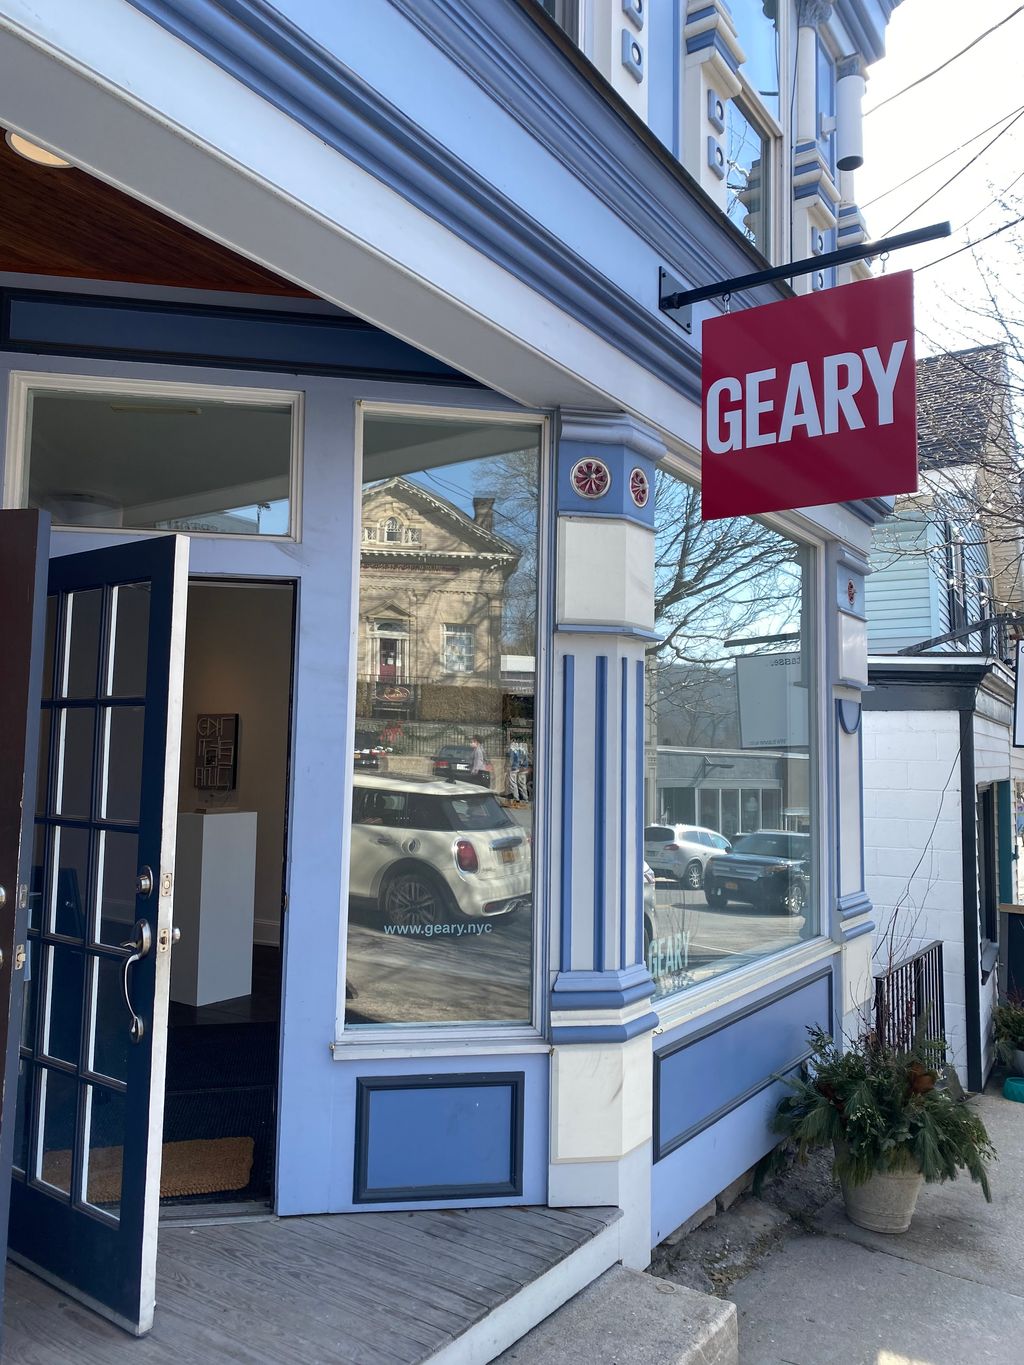 Geary Contemporary